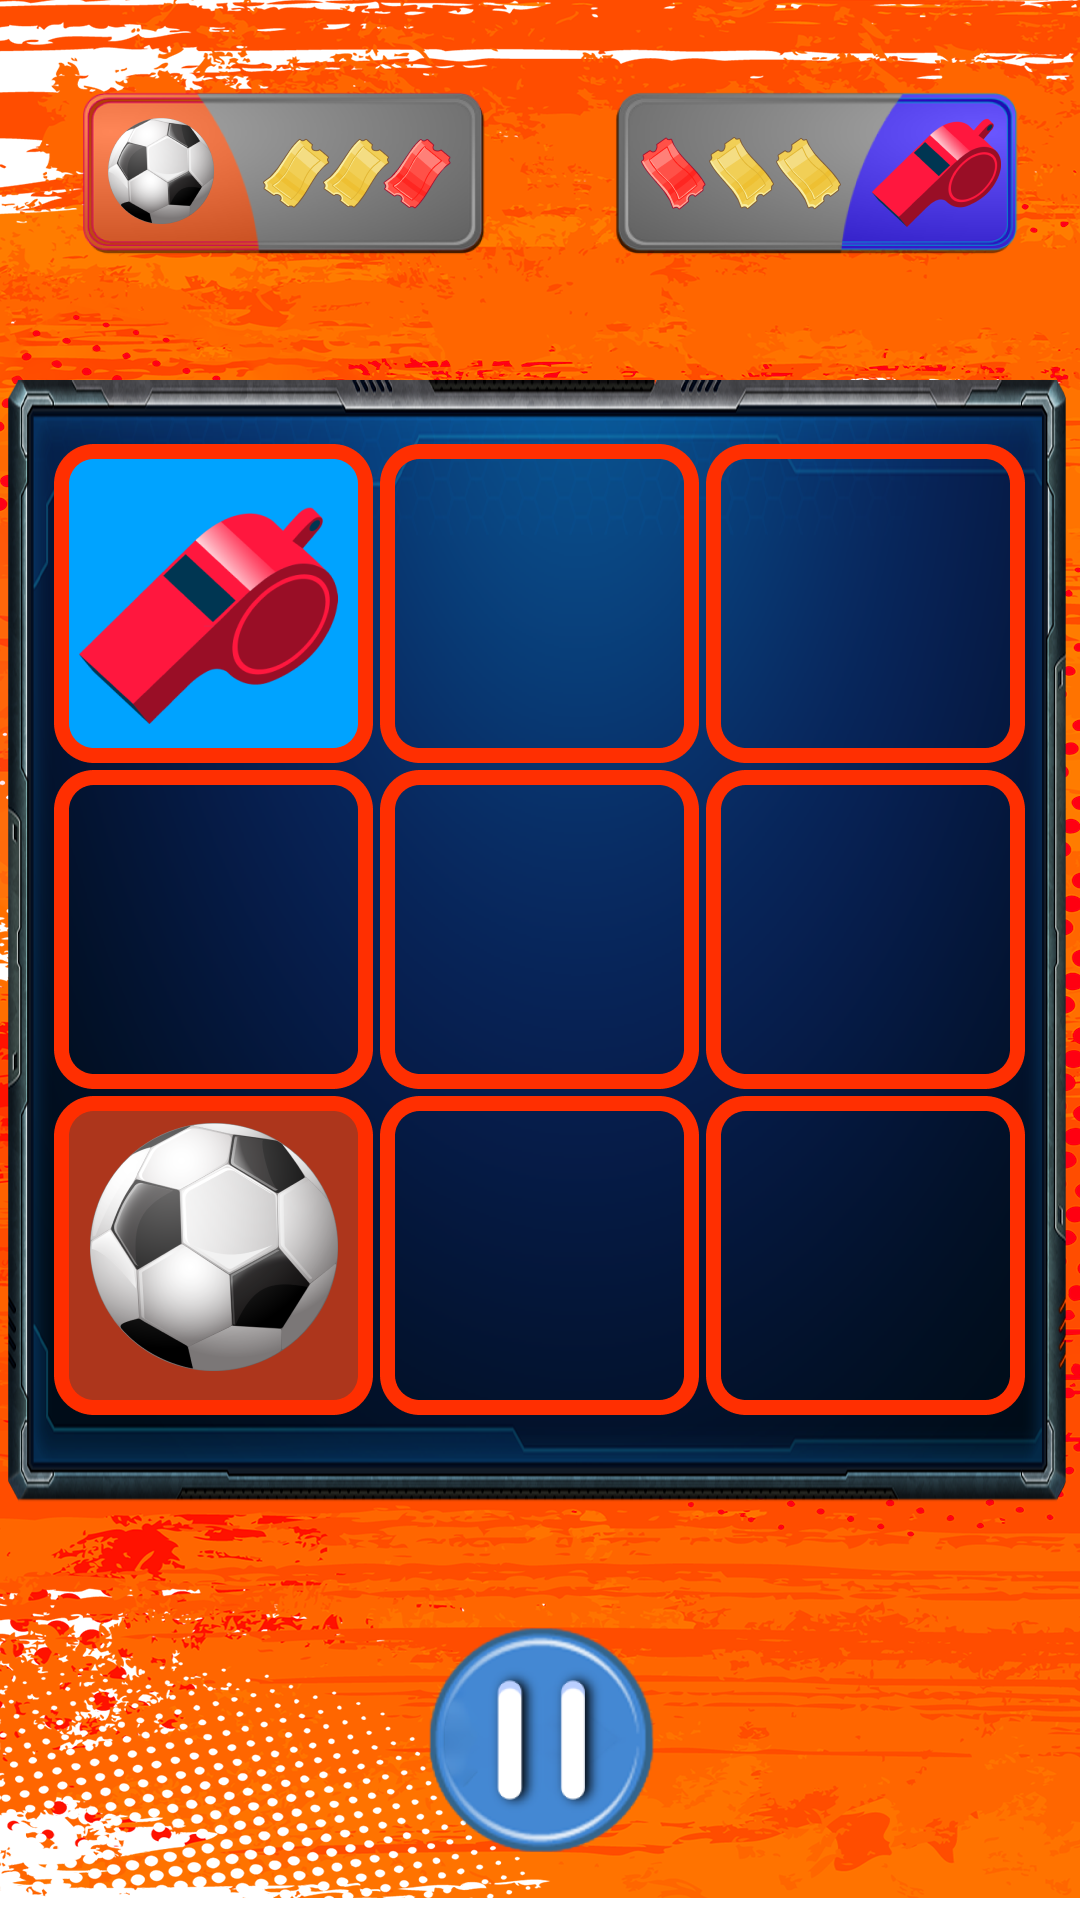 Tic-Tac-Toe Game With Soccer Balls Instead of Circles and Crosses